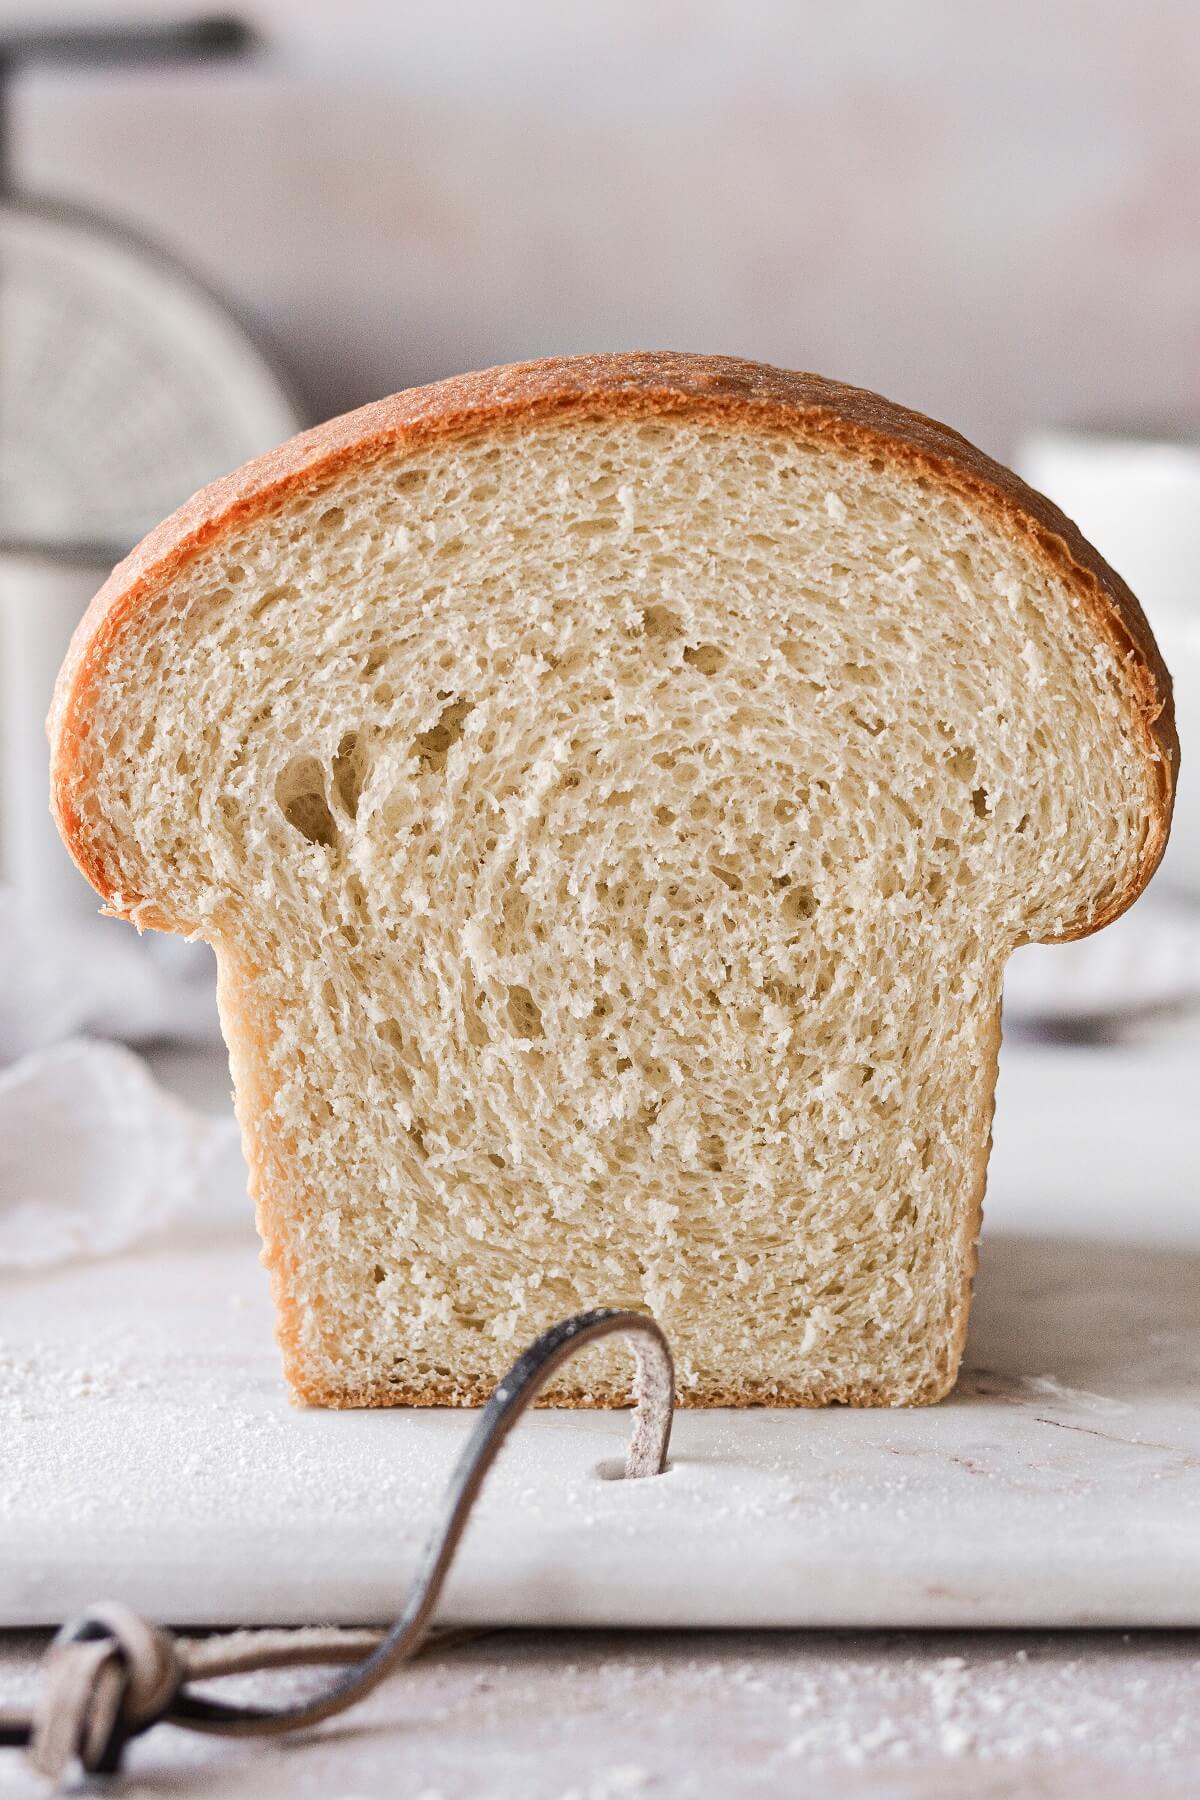 A loaf of homemade white sandwich bread, with a slice cut to show the crumb inside.